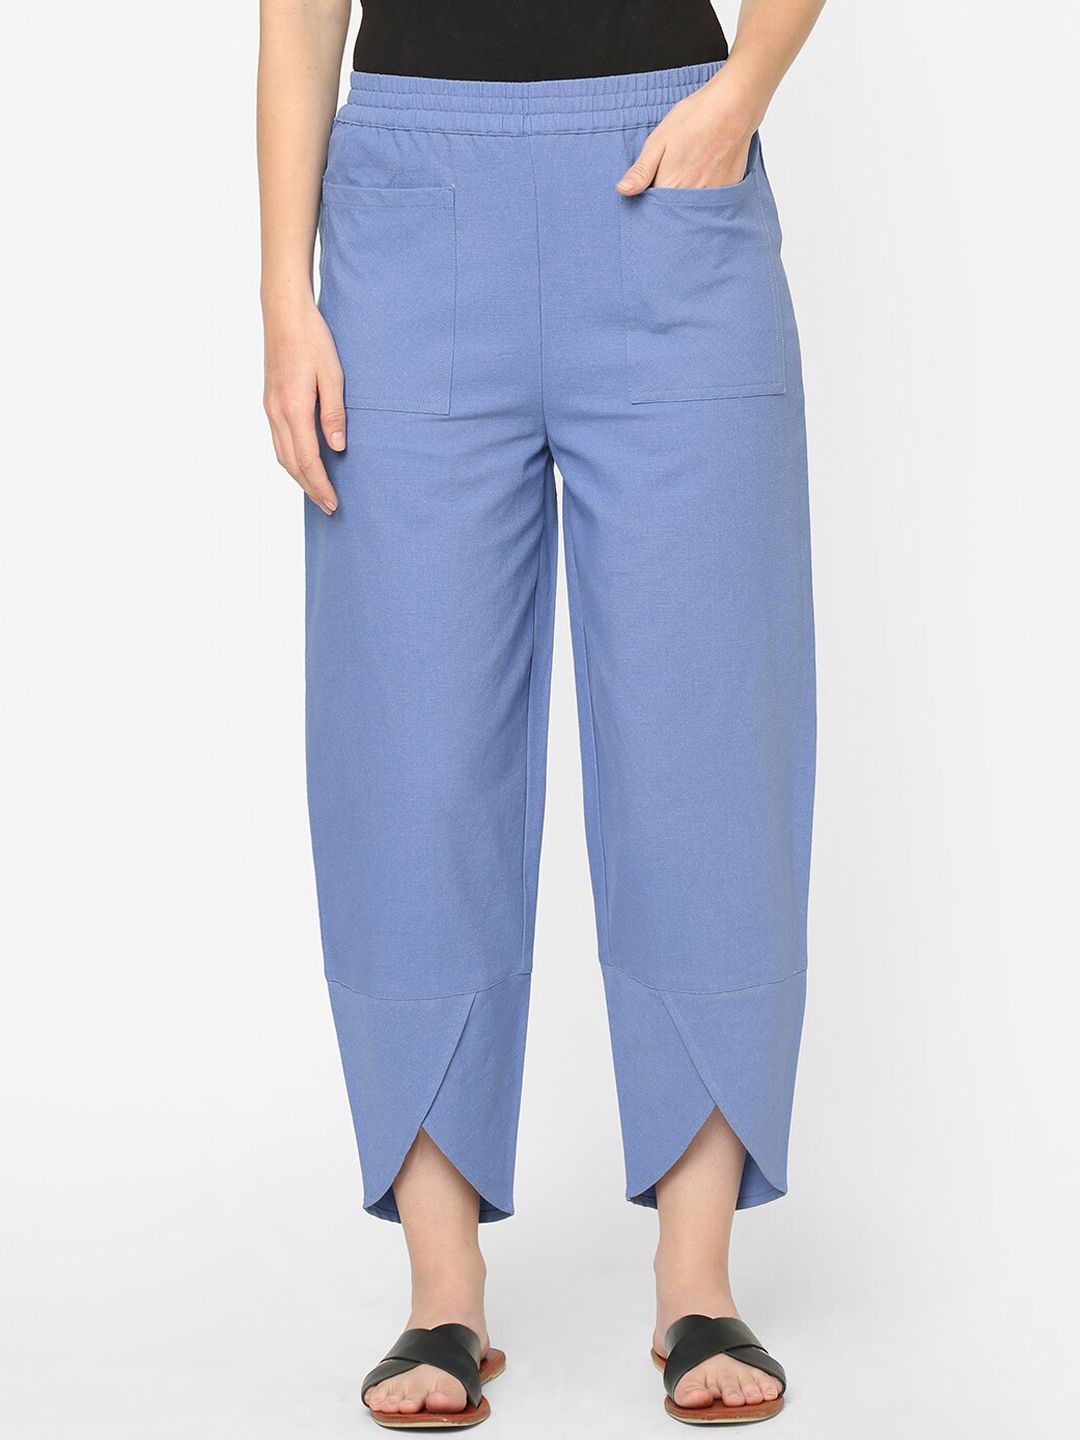 Mystere Paris Women Blue Solid Relaxed-Fit Cotton Lounge Pants Price in India